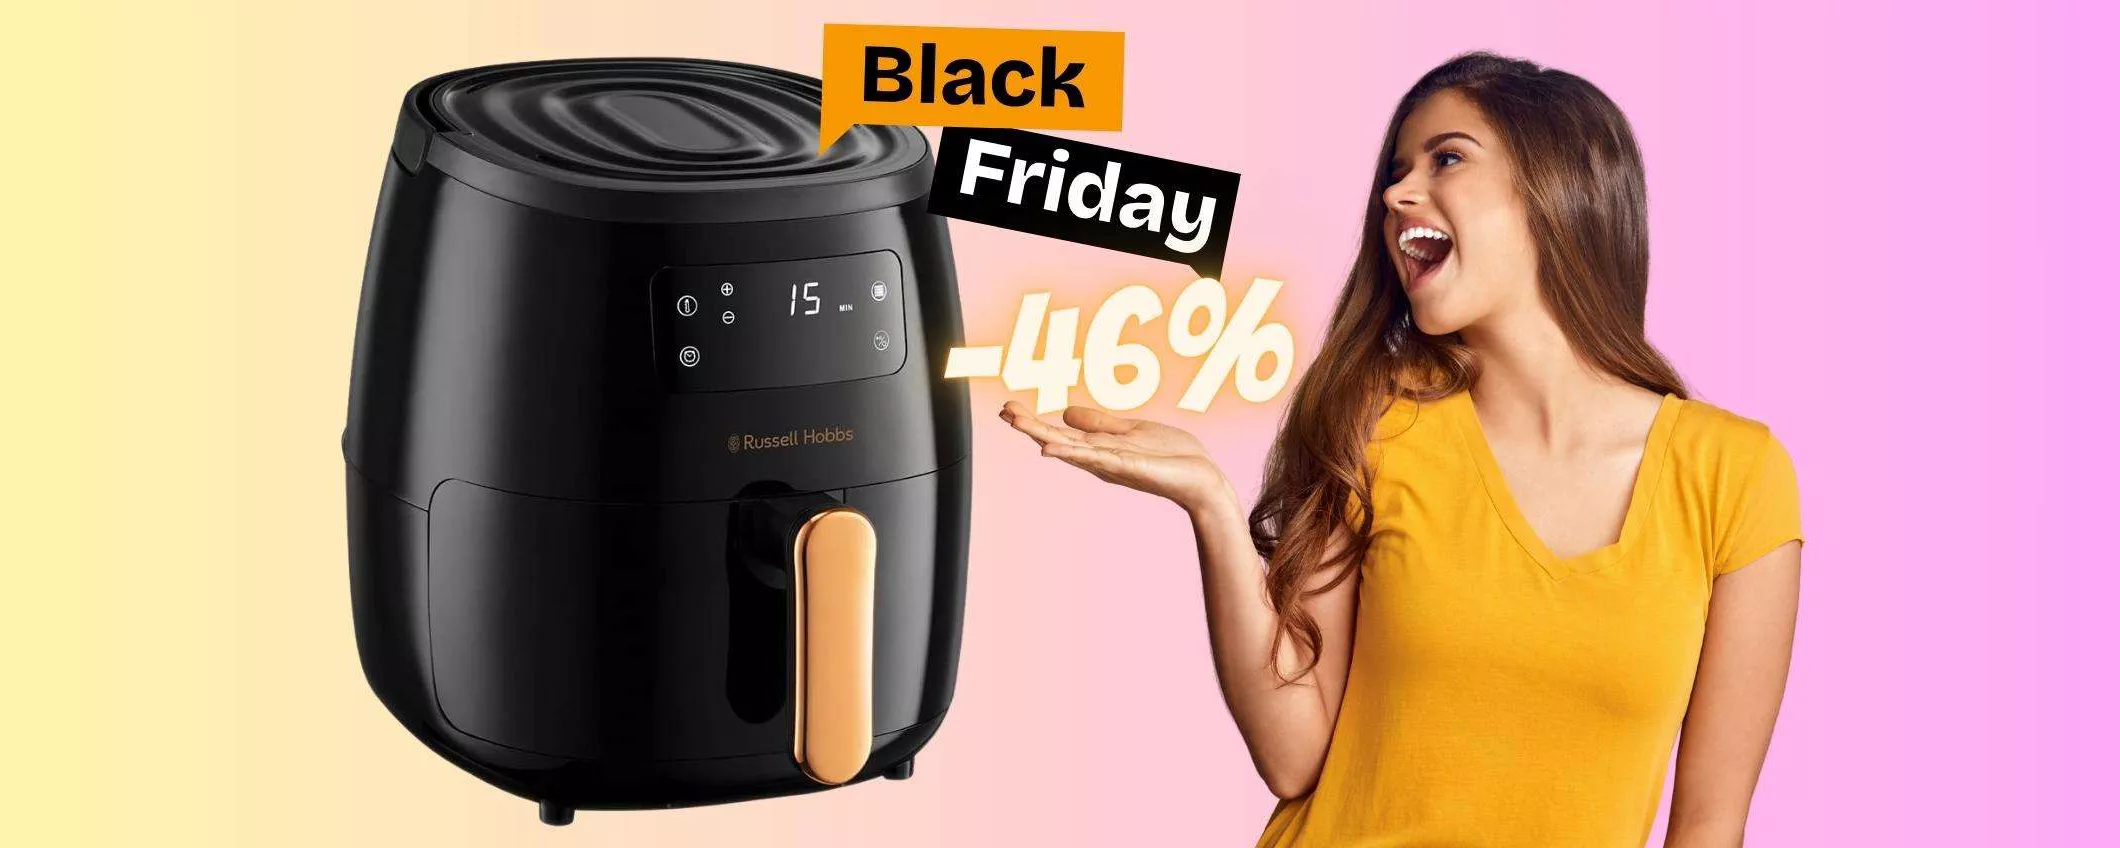 Friggitrice ad aria XL Russell Hobbs a MENO di 80€, WOW (-46%)